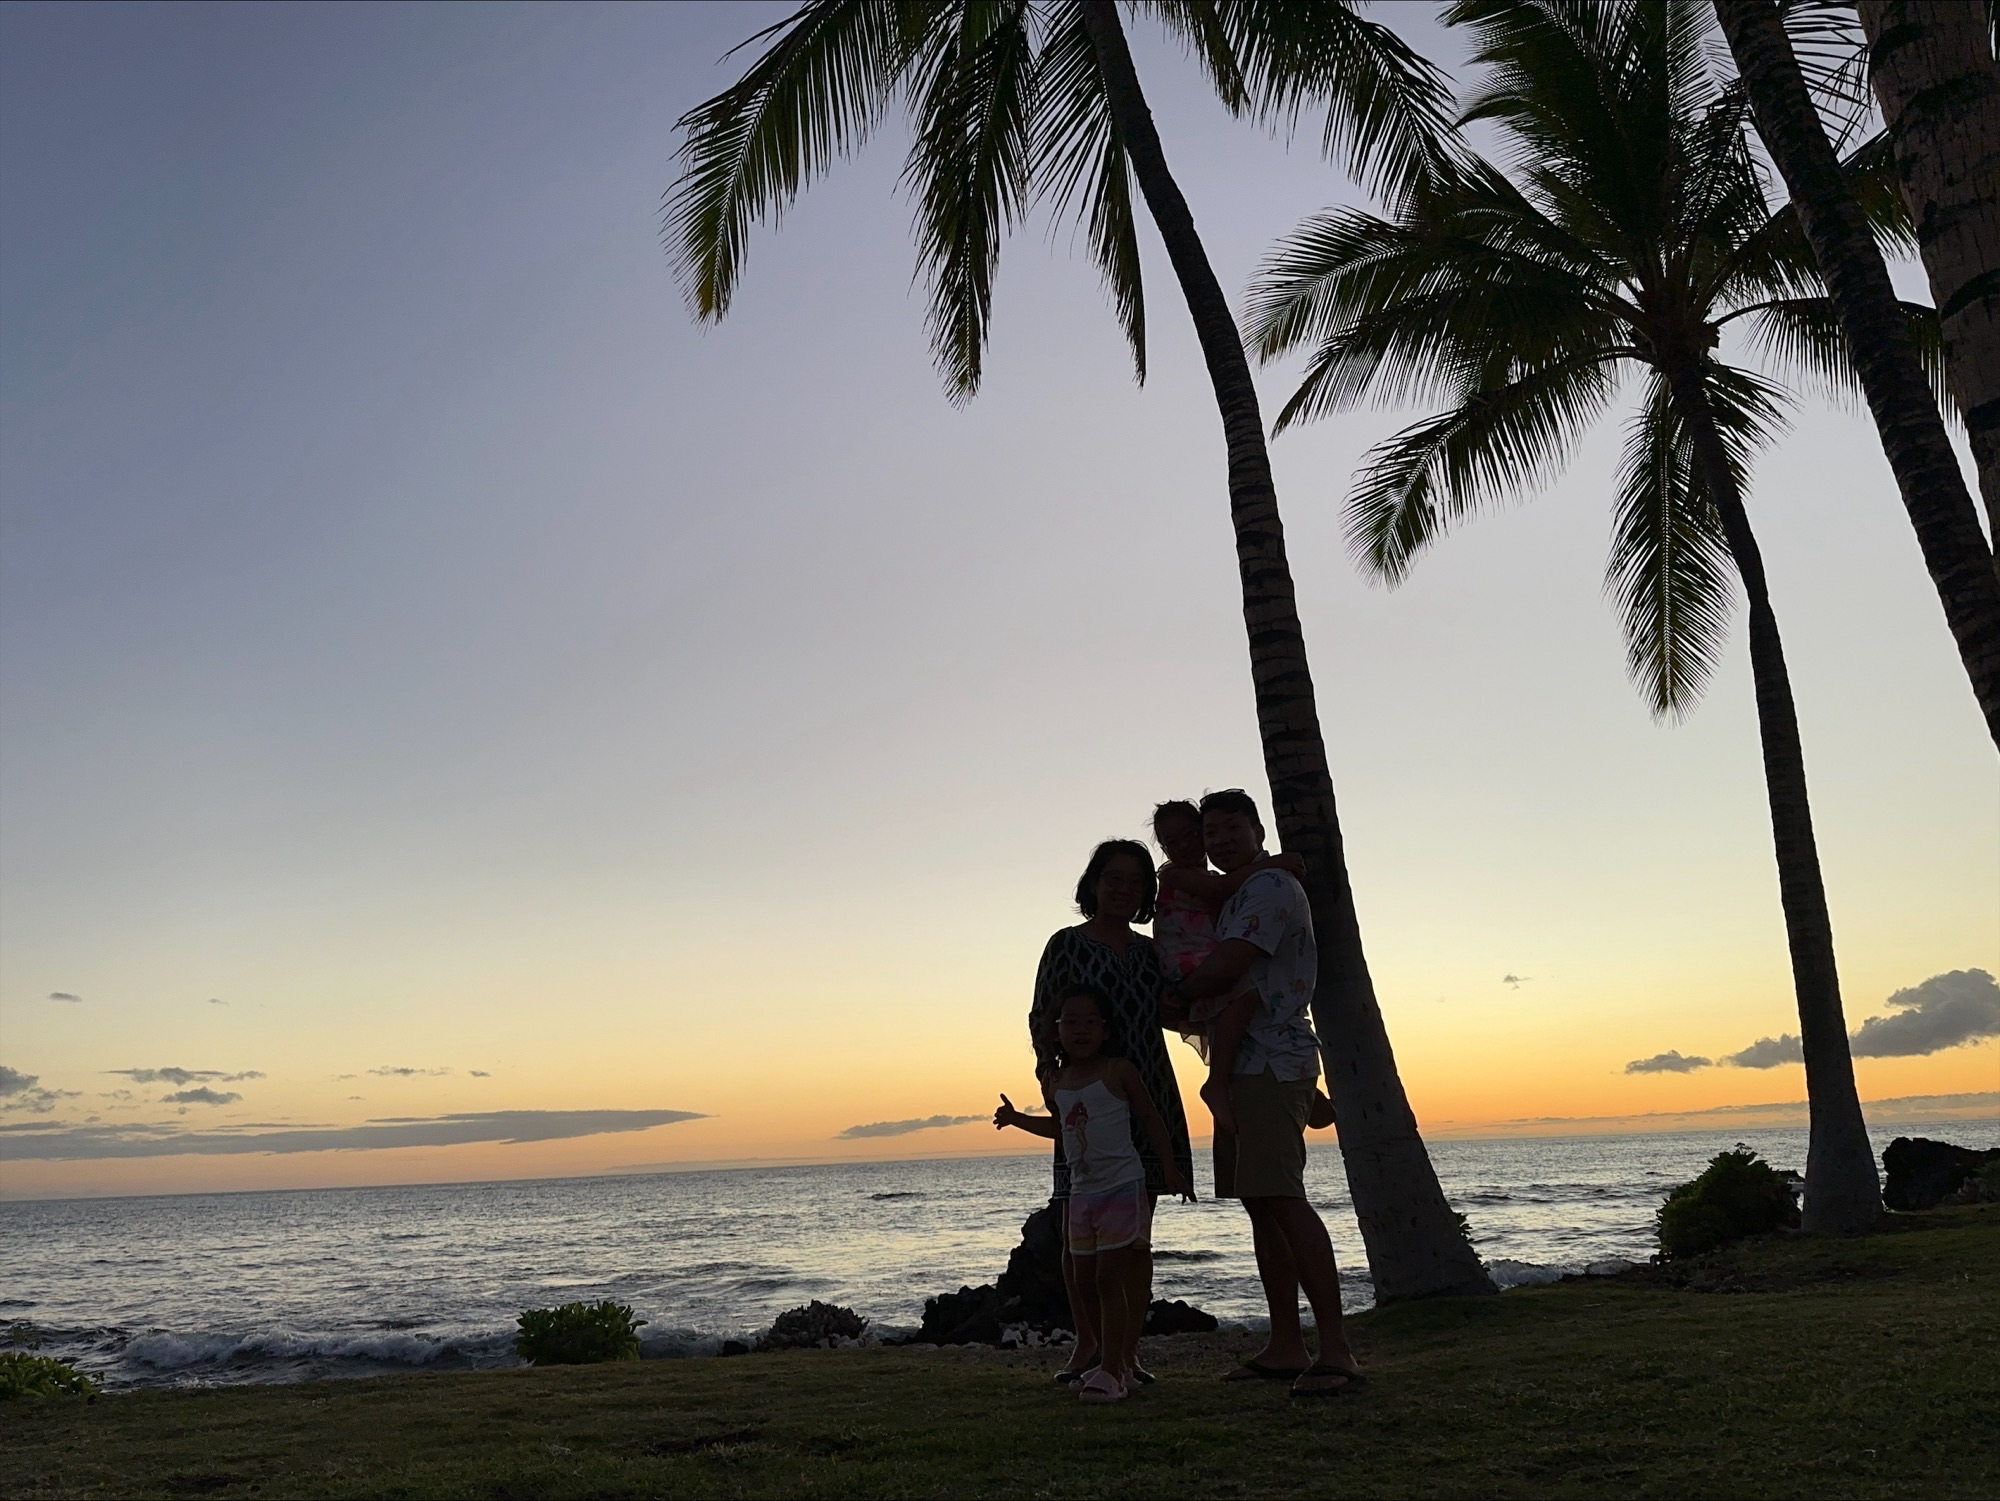 david lacy and family in hawaii against a sunset with palm trees